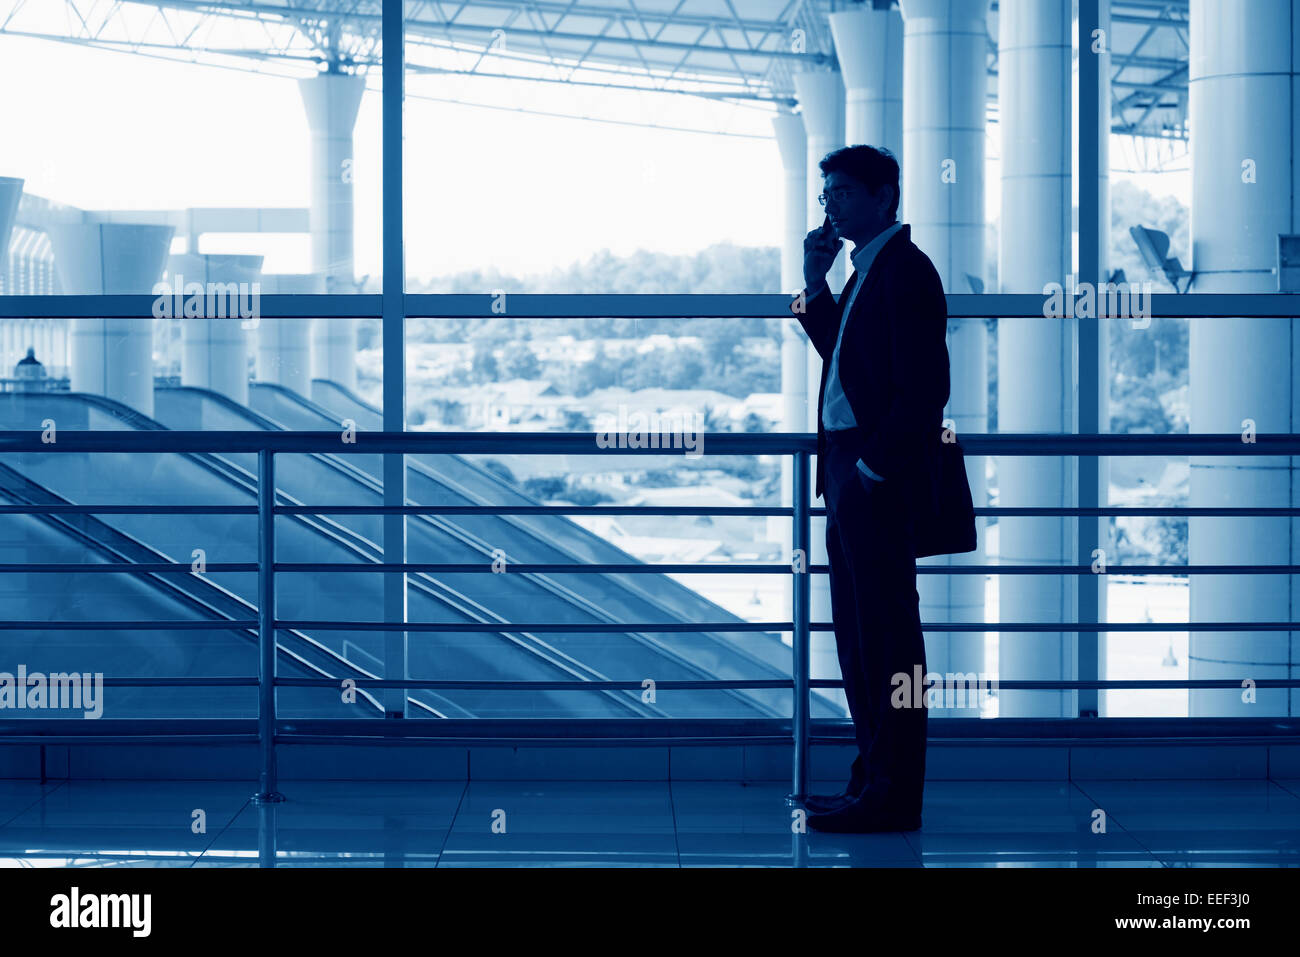 Silhouette of Asian Indian man on mobile phone in modern office building, blue tone. Stock Photo